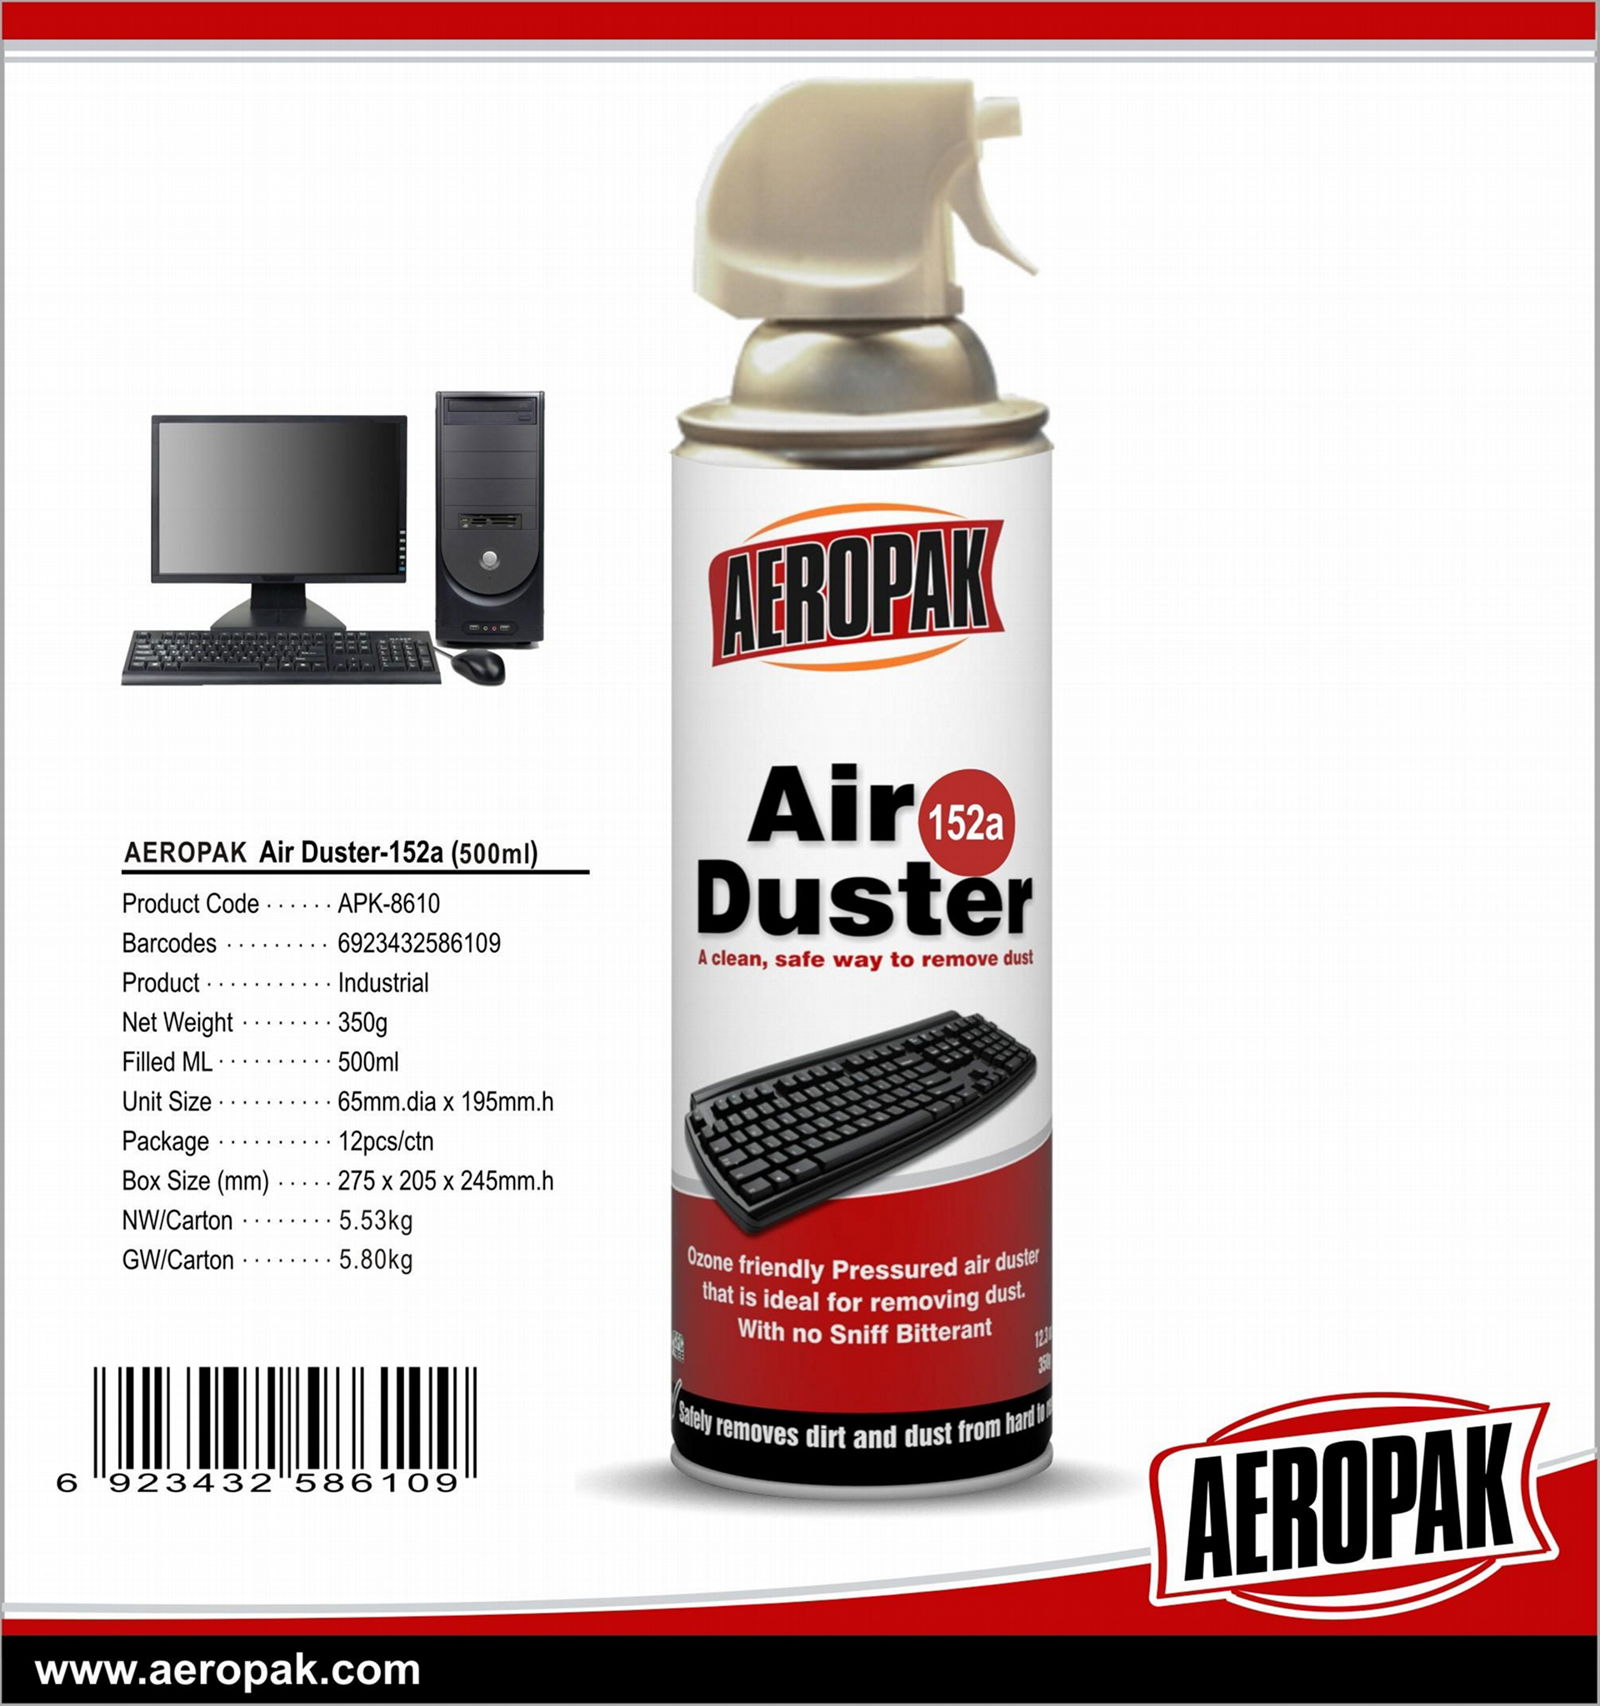 Air Duster Spray For Computer Compressed Spray Cleaner 134a 152a - APK-8610  - Aeropak (China Manufacturer) - Other Chemicals - Chemicals